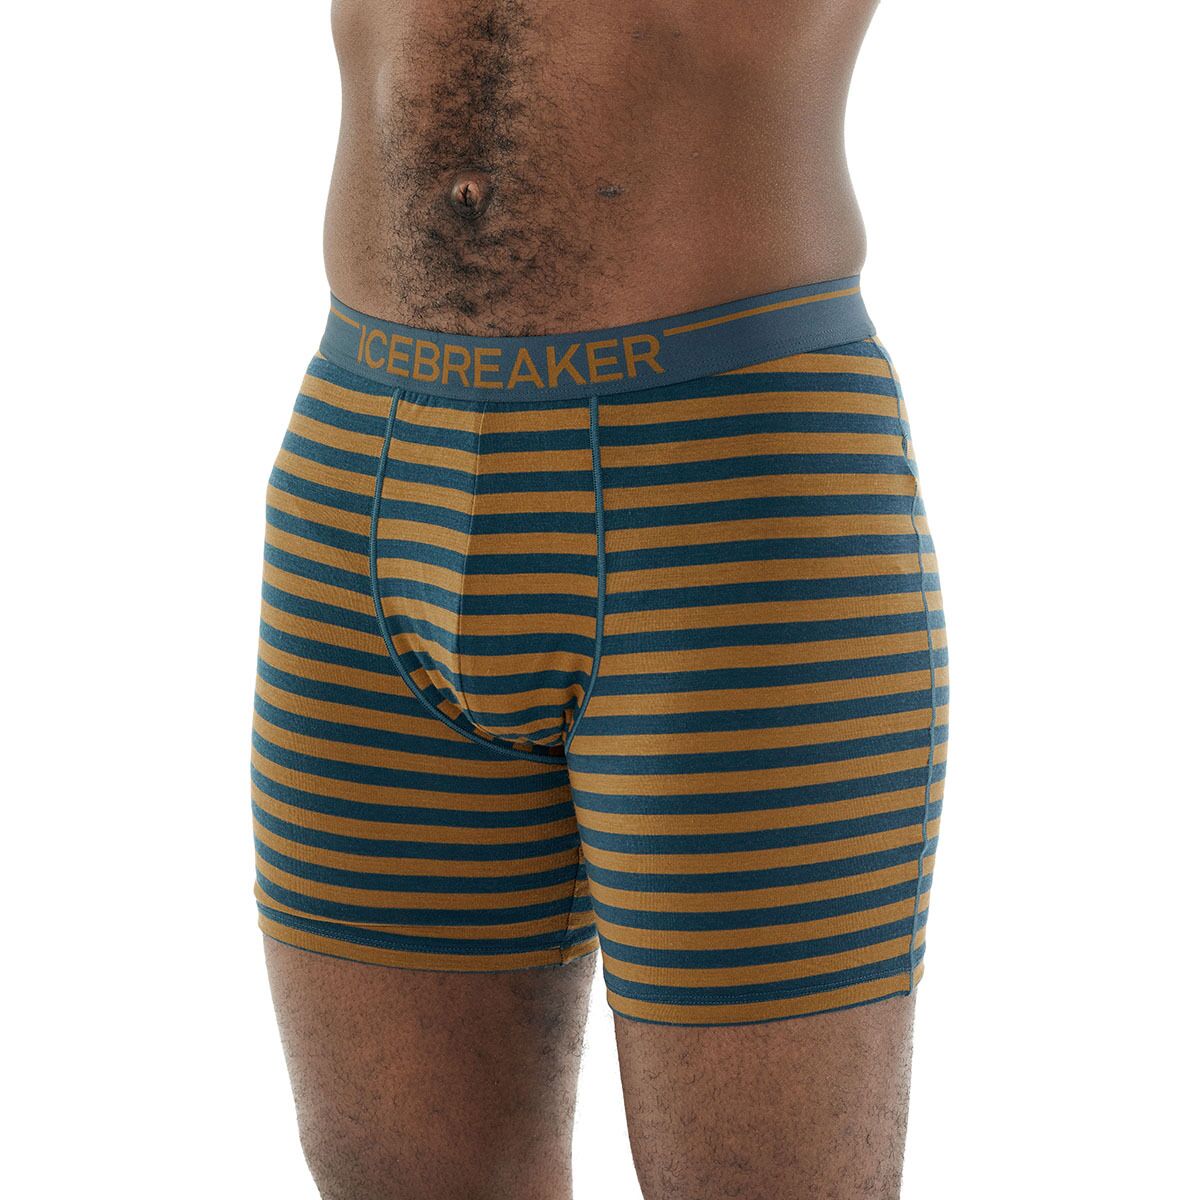 Up and Under. Icebreaker Anatomica Boxer Briefs with Fly Bodyfit 150 Man  Men's Boxer Shorts